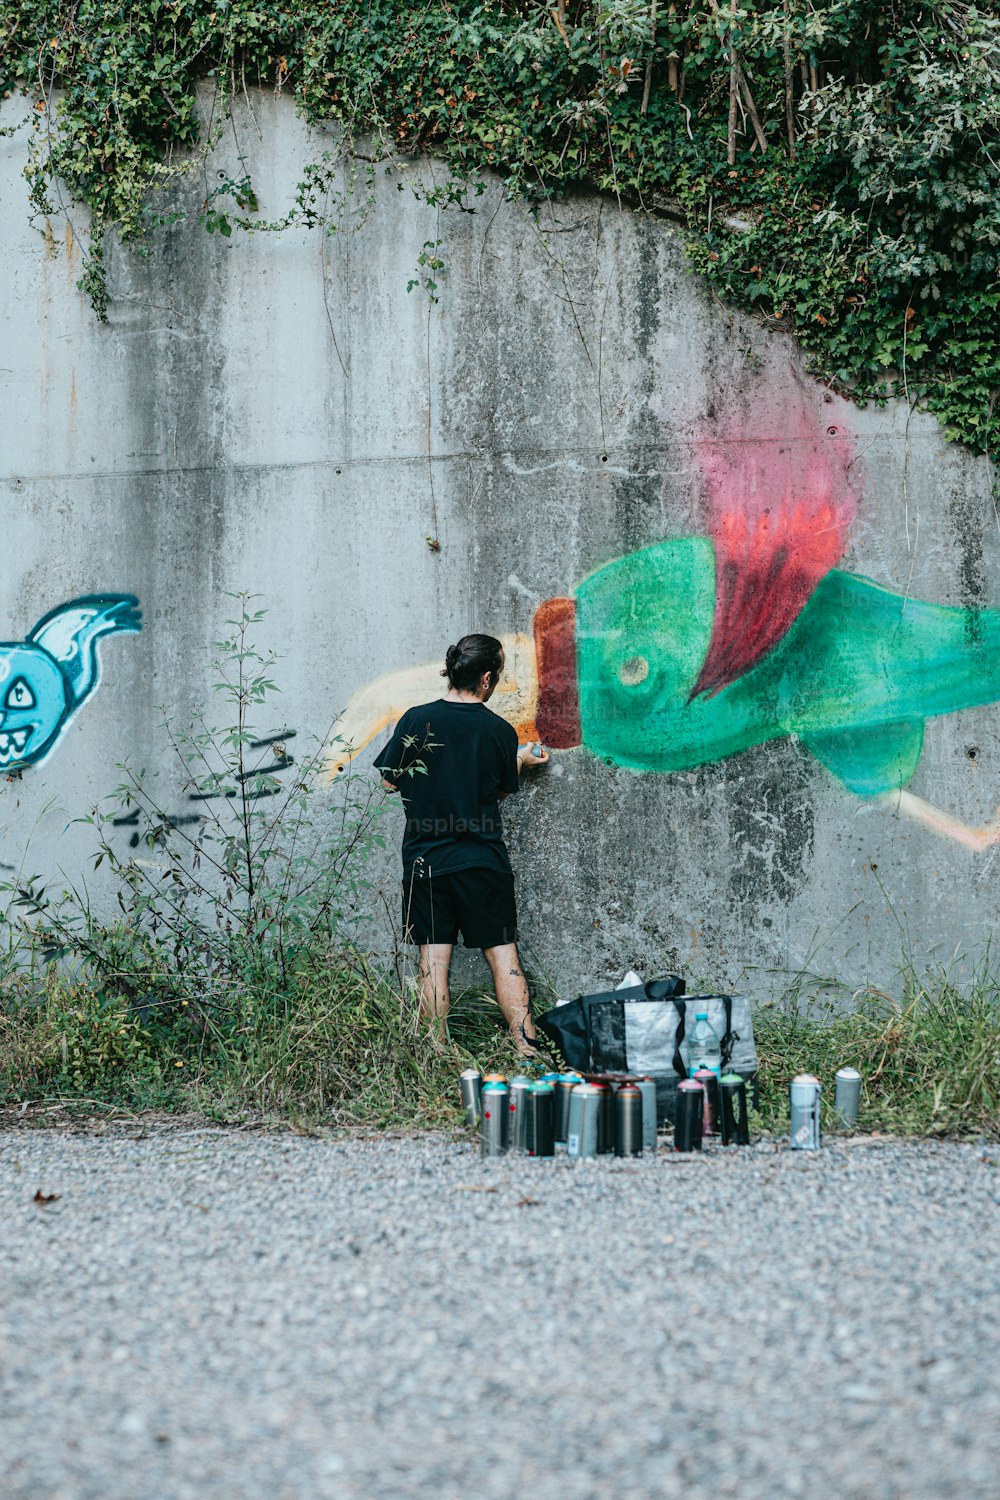 a man painting a fish on a wall